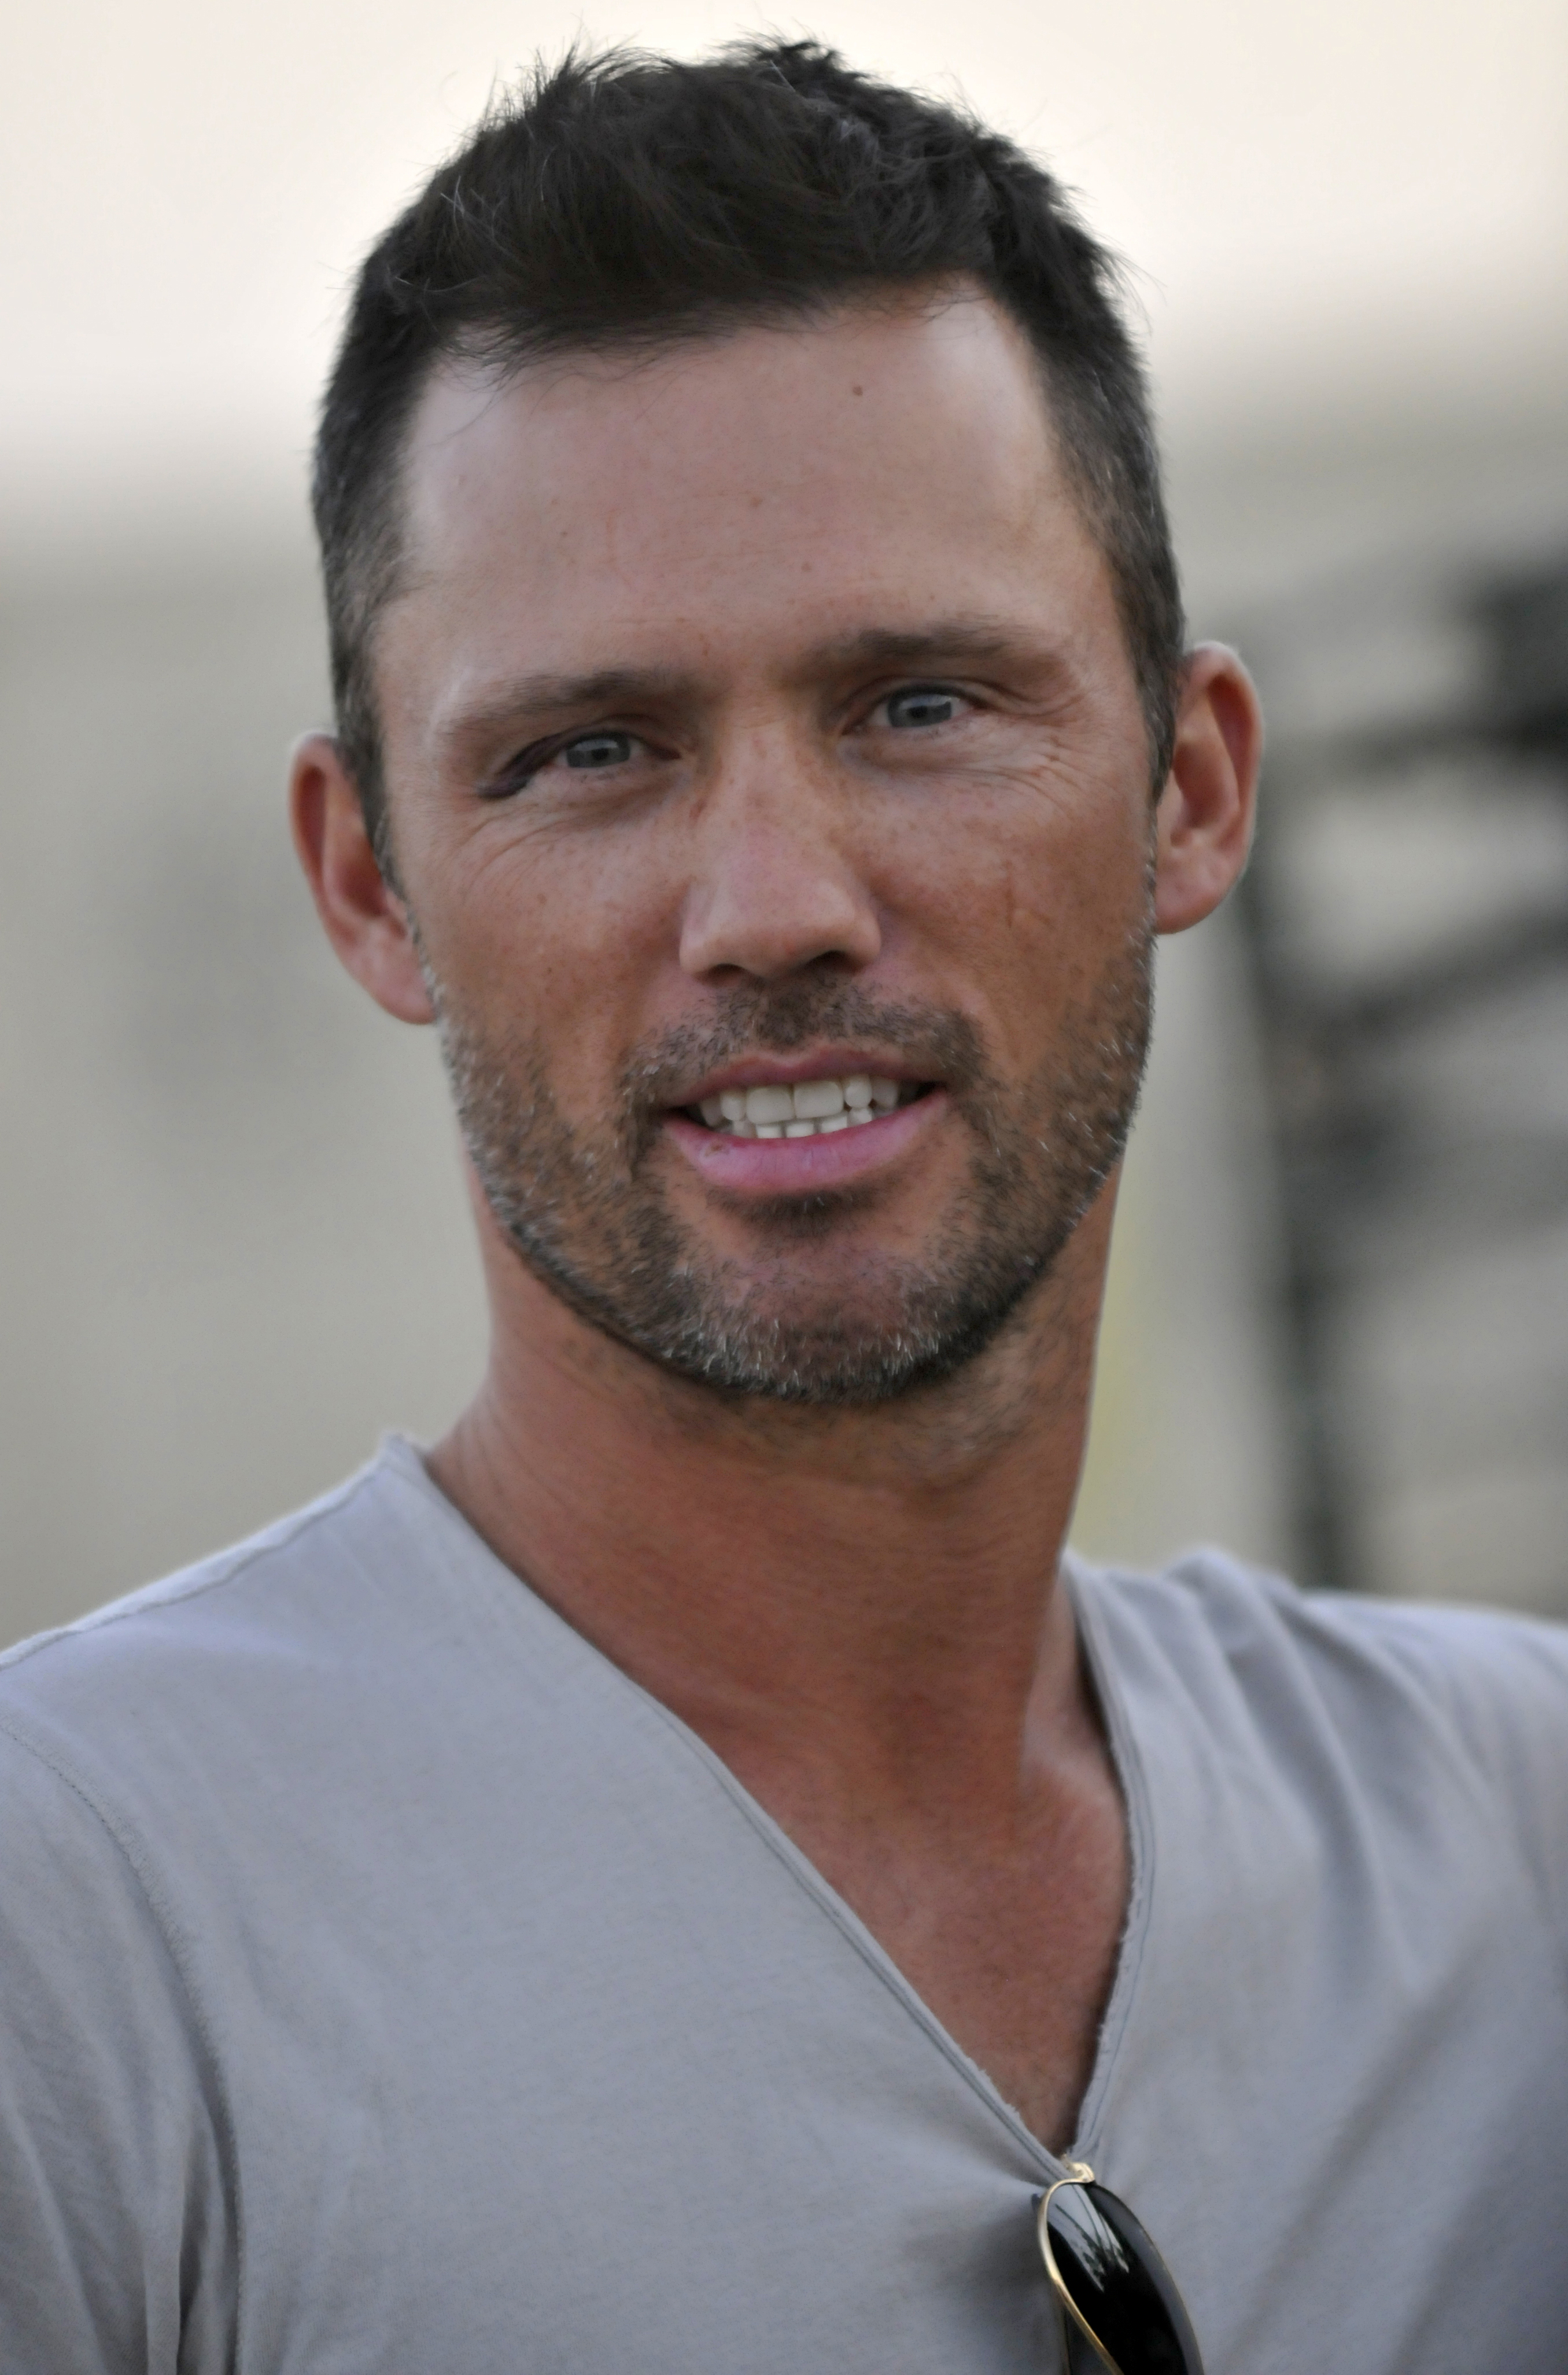 The 55-year old son of father (?) and mother(?) Jeffrey Donovan in 2024 photo. Jeffrey Donovan earned a  million dollar salary - leaving the net worth at 10 million in 2024